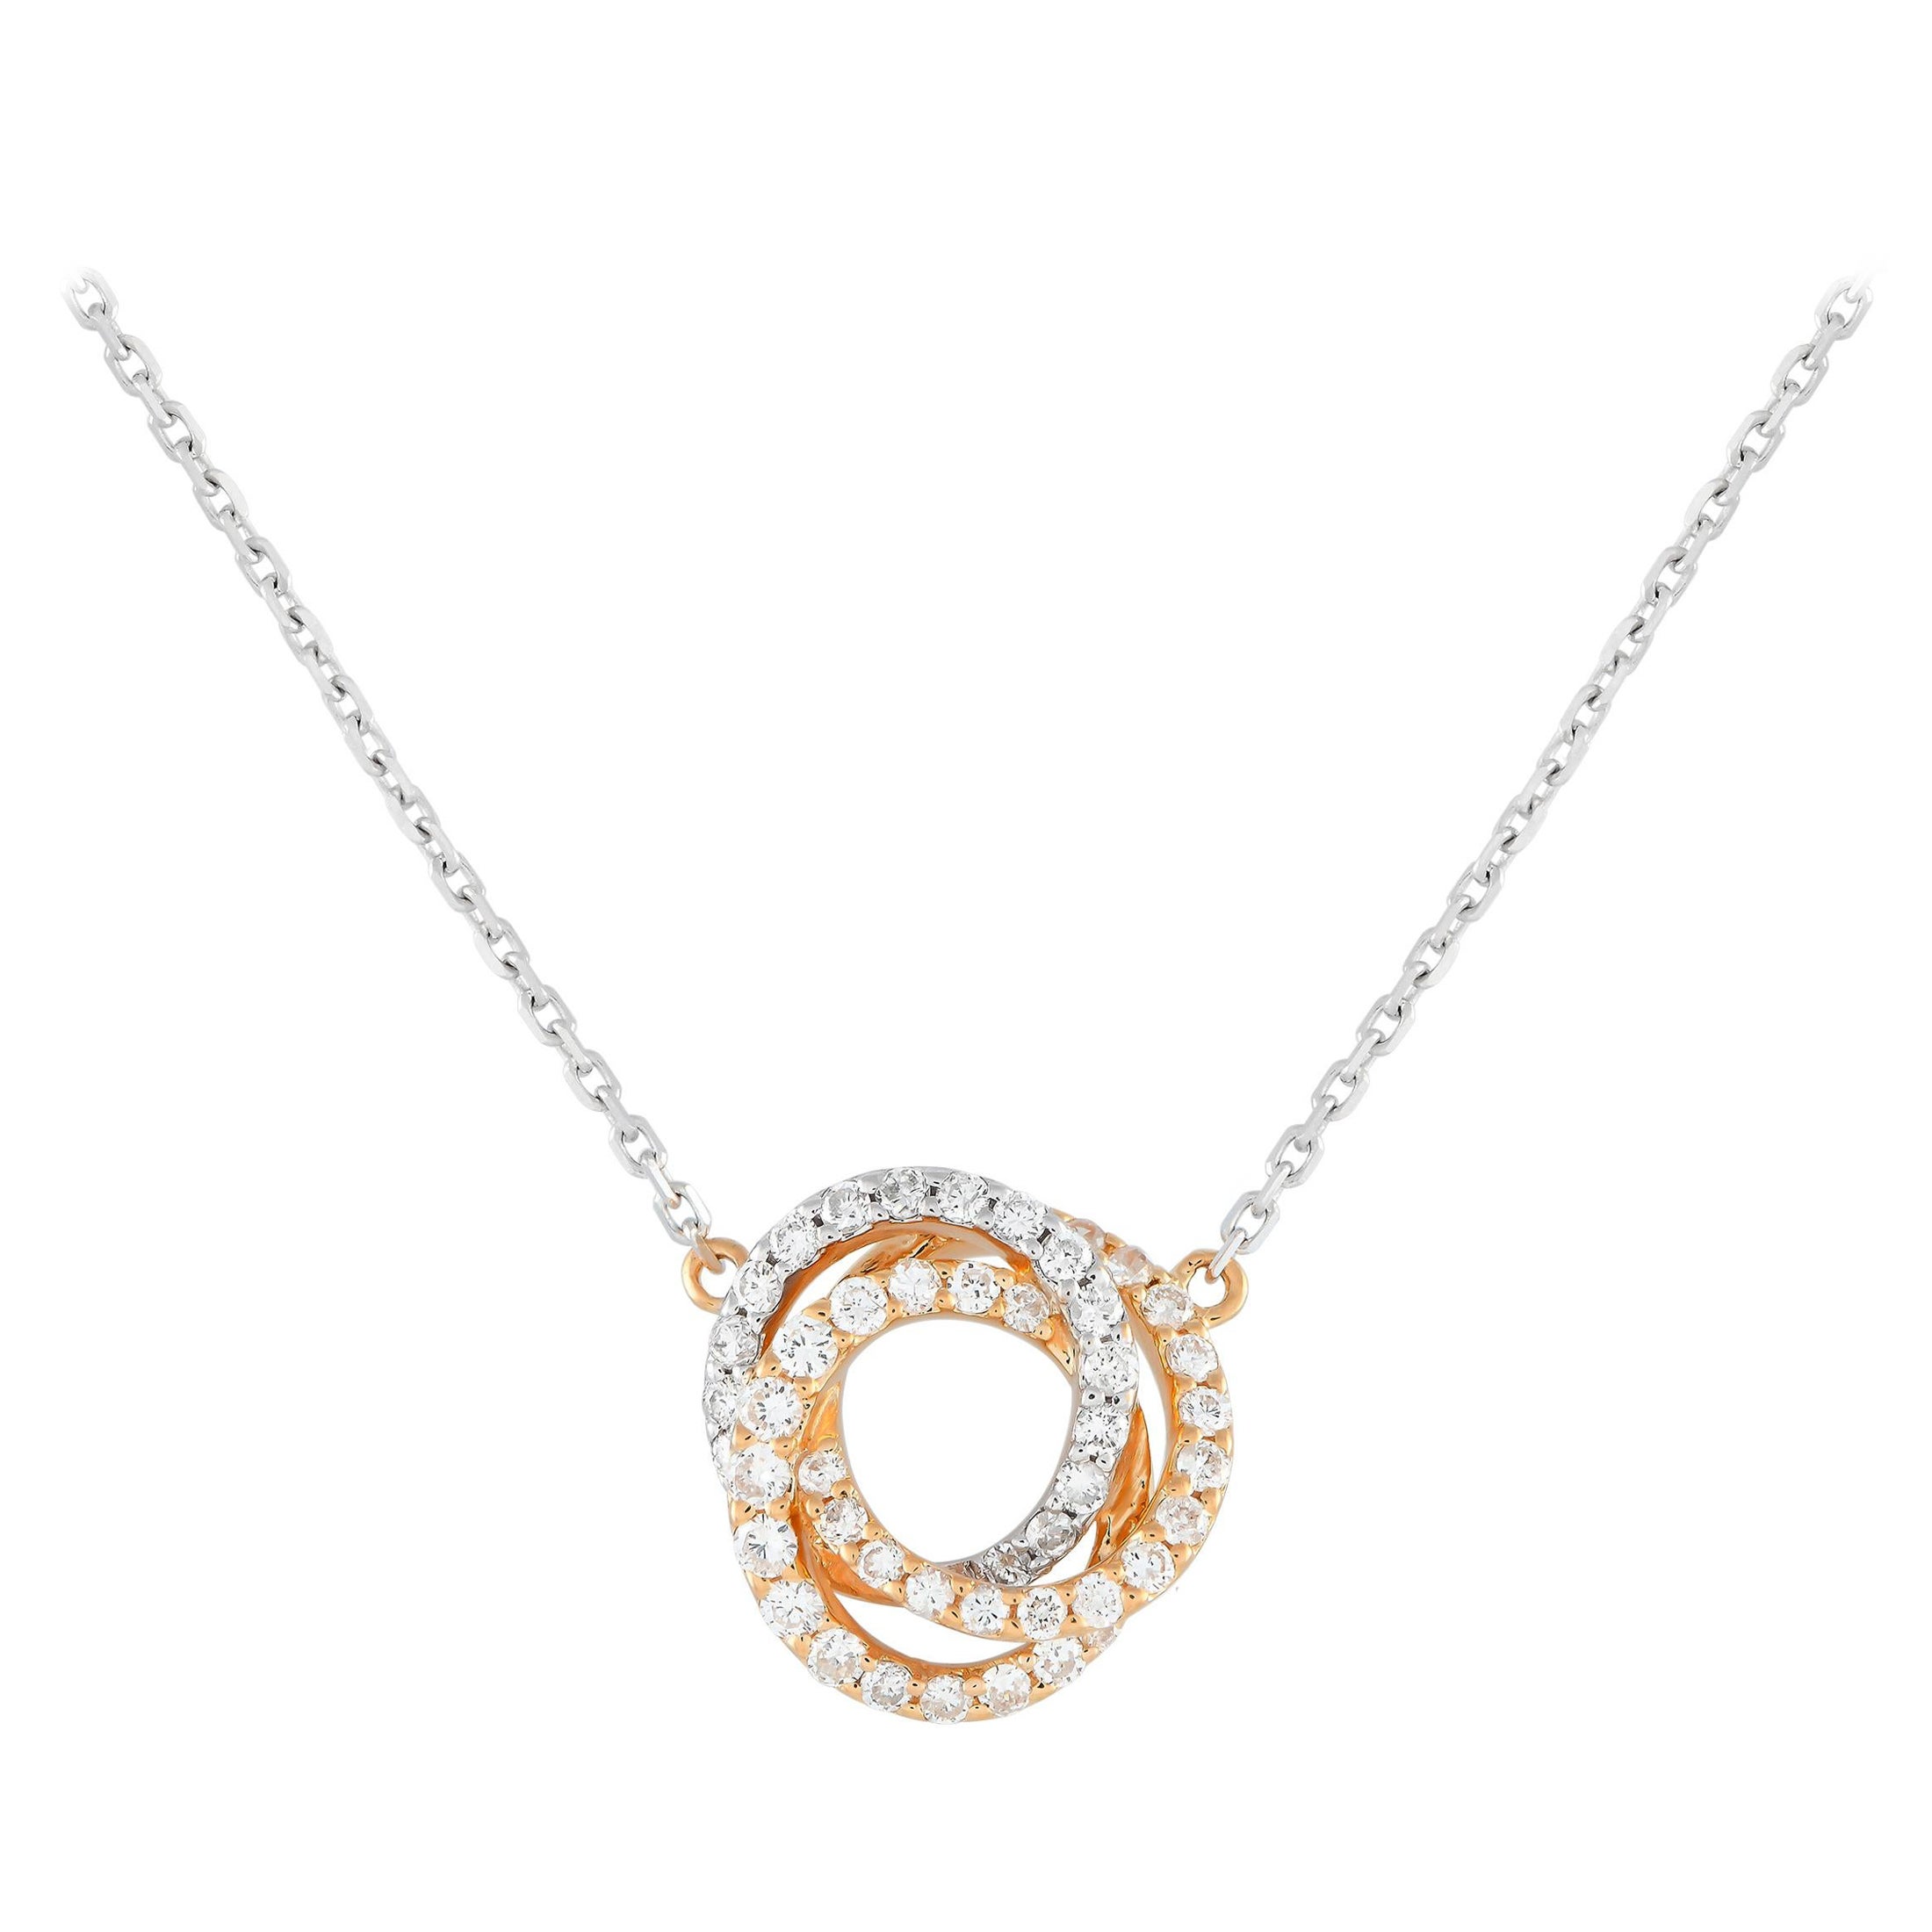 18K White and Rose Gold 0.50ct Diamond Triple Ring Necklace ANK-13200-TRI For Sale